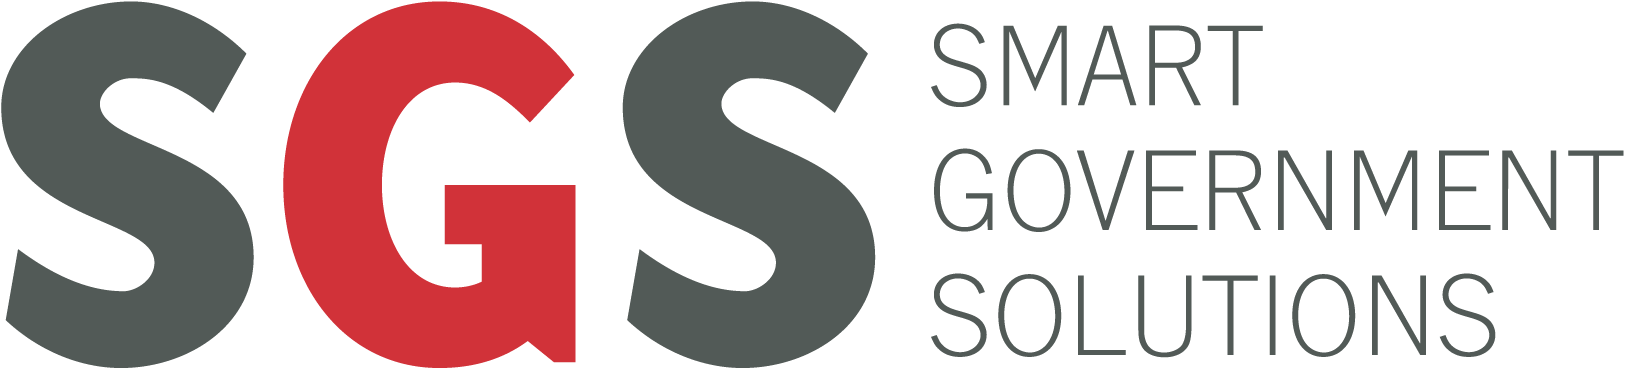 Smart Government Solutions SGS